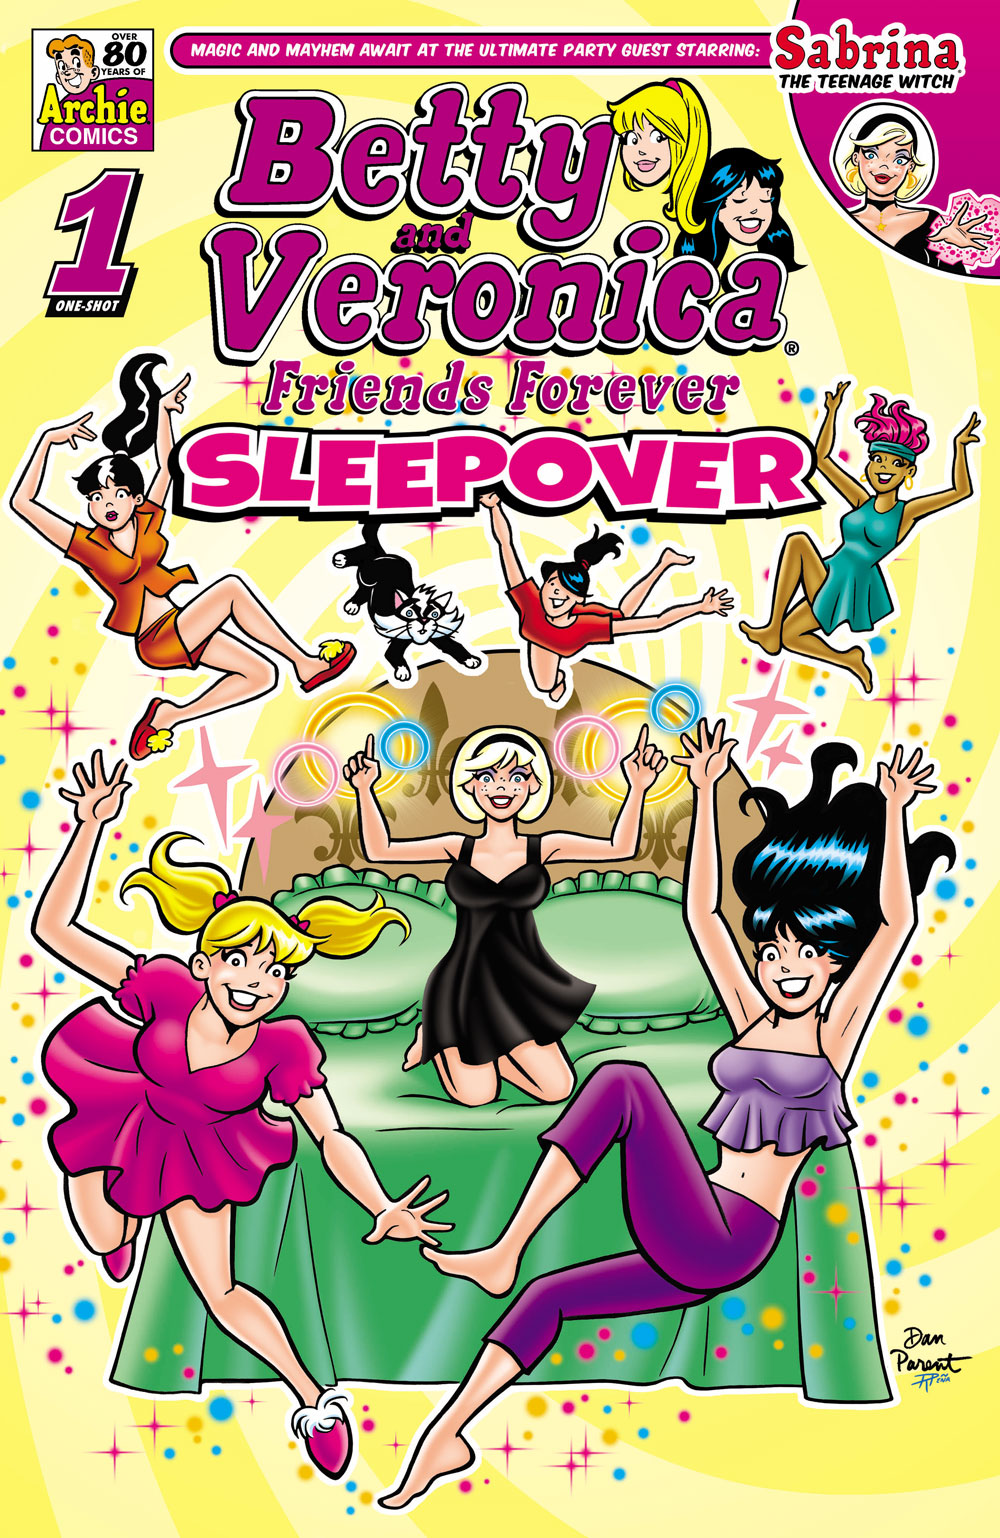 Cover of BETTY & VERONICA FRIENDS FOREVER: SLEEPOVER. Betty, Veronica, Sabrina, and other girls float around a bedroom from one of Sabrina's magical spells.